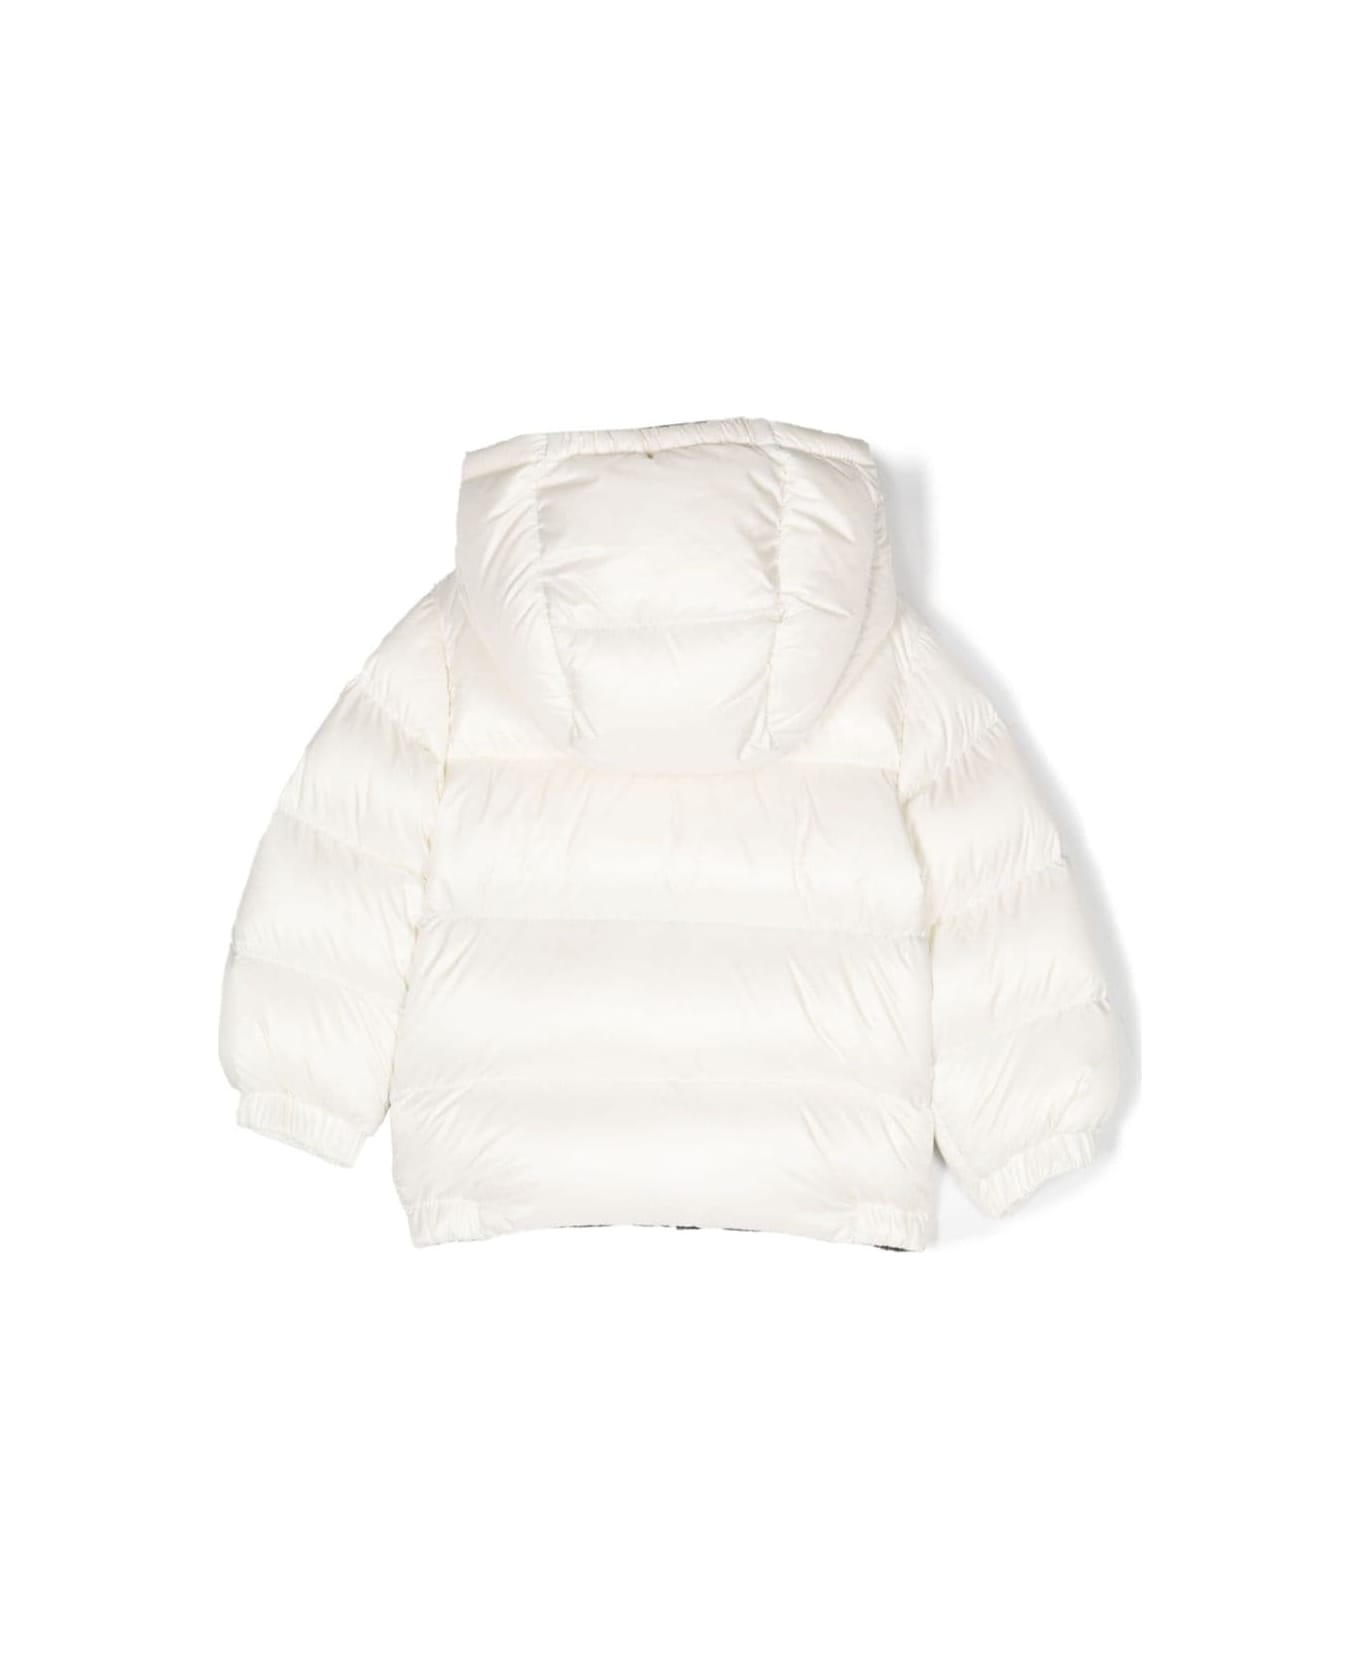 Moncler New Macaire Jacket - White